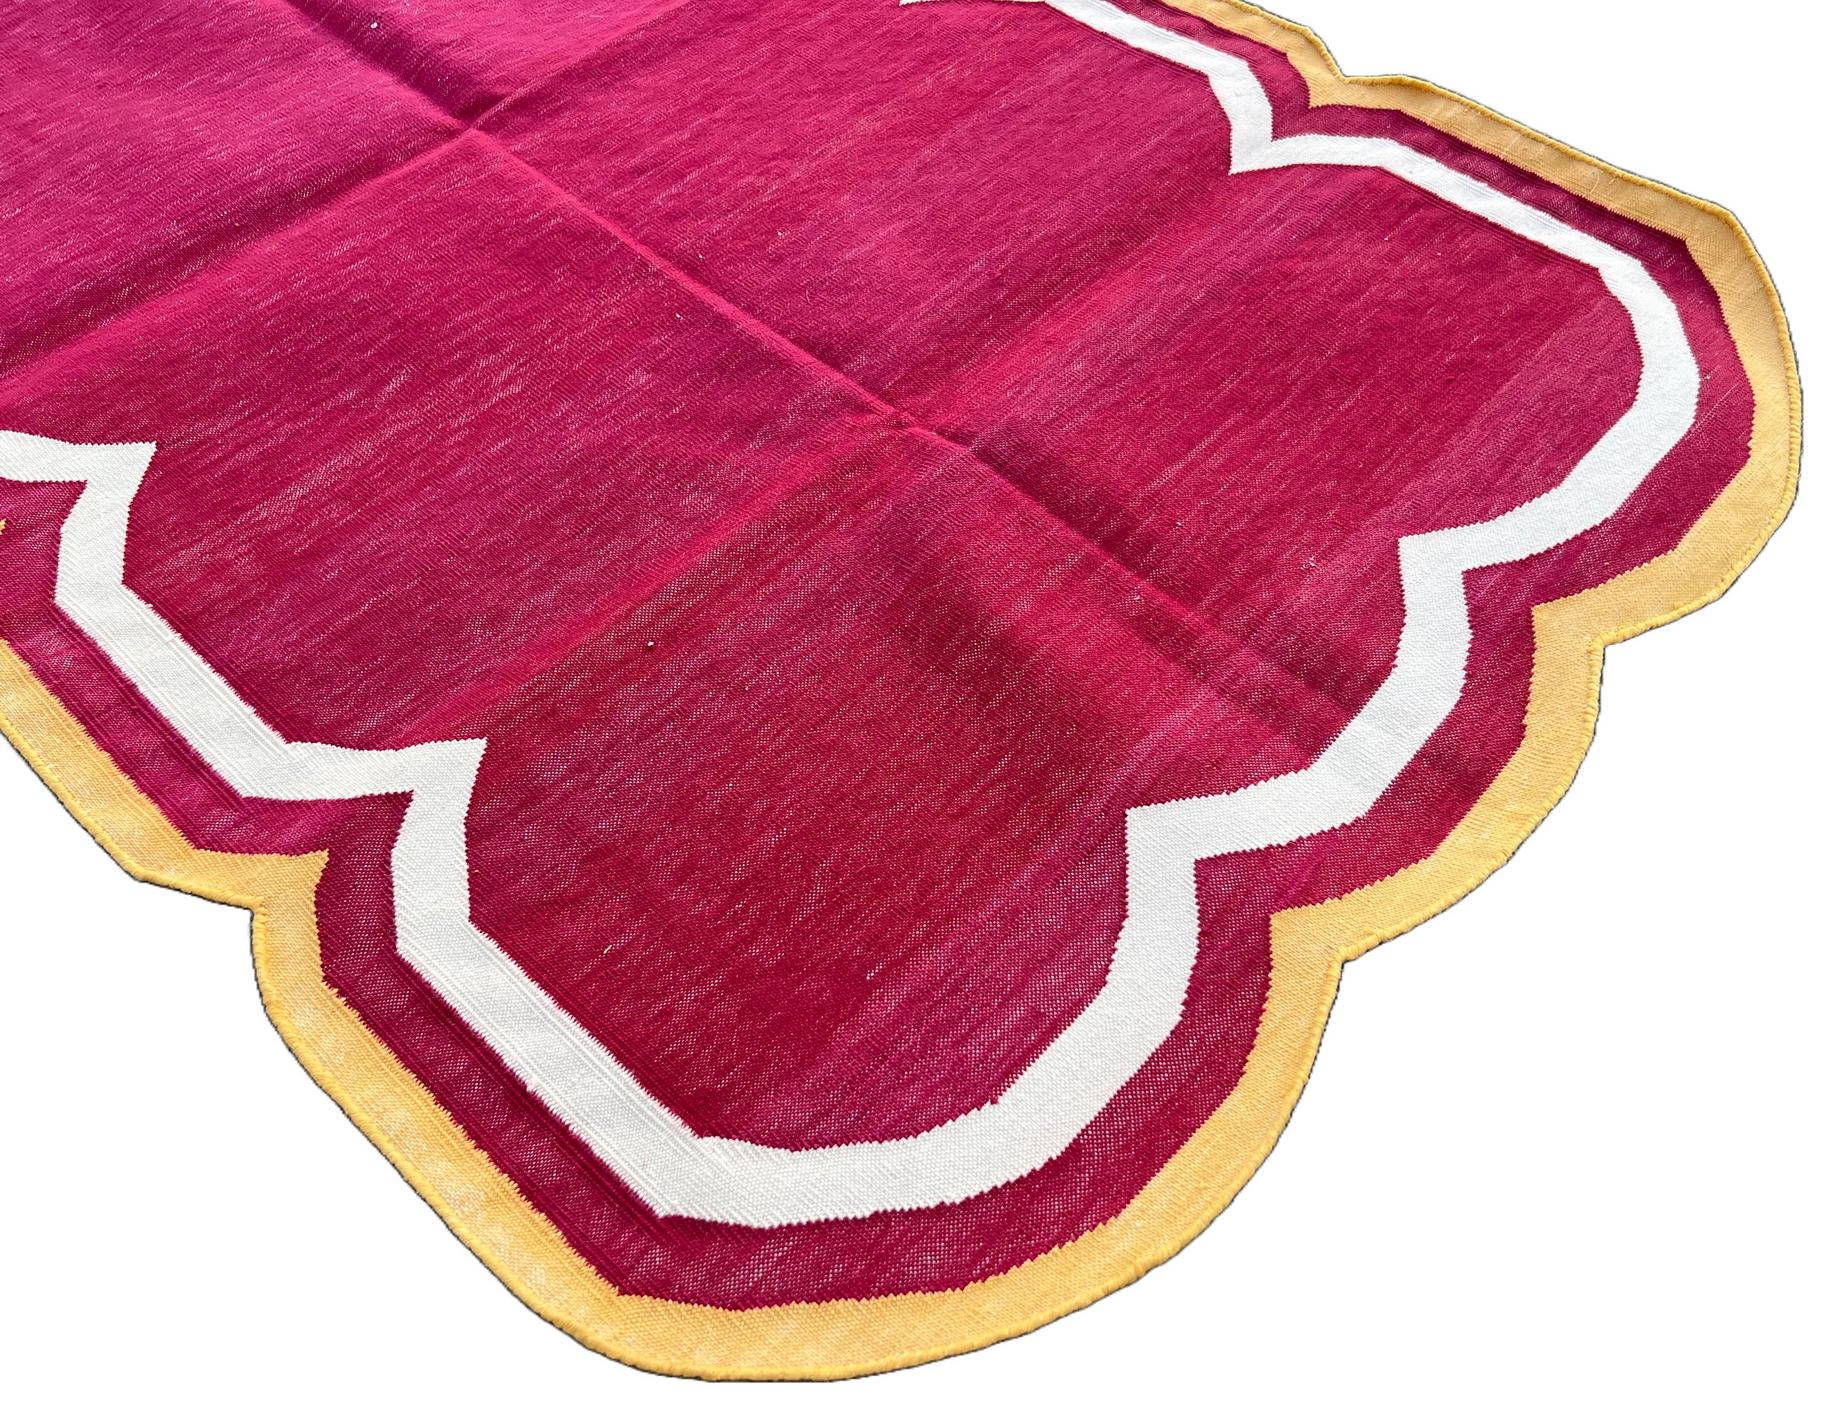 Indian Handmade Cotton Area Flat Weave Rug, 3x5 Pink And Yellow Scalloped Kilim Dhurrie For Sale